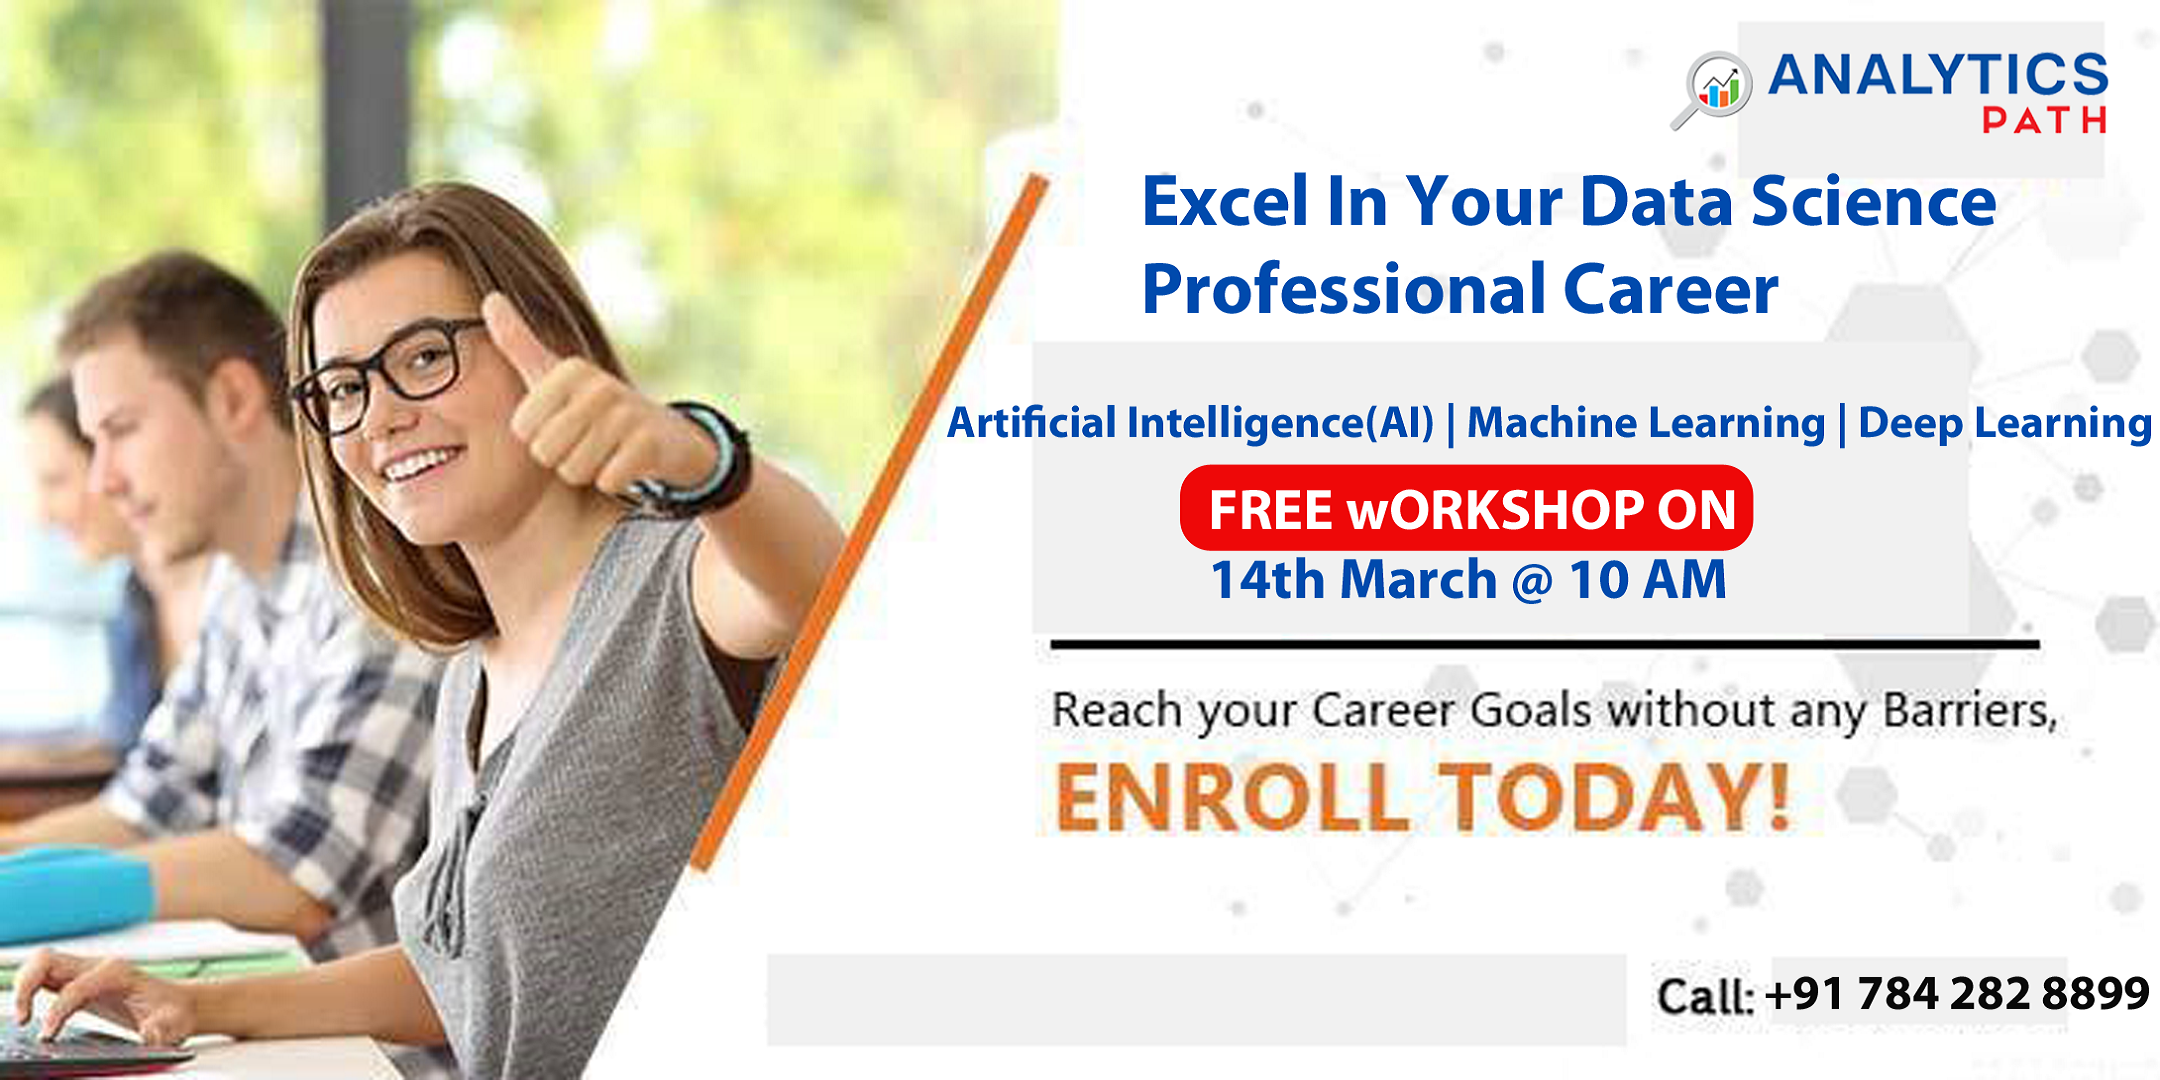 Enroll For Free Data Science Interactive Workshop On Saturday, 14th March@ 10 AM To Interact With IIT & IIM By Analytics Path, Hyderabad., Hyderabad, Telangana, India